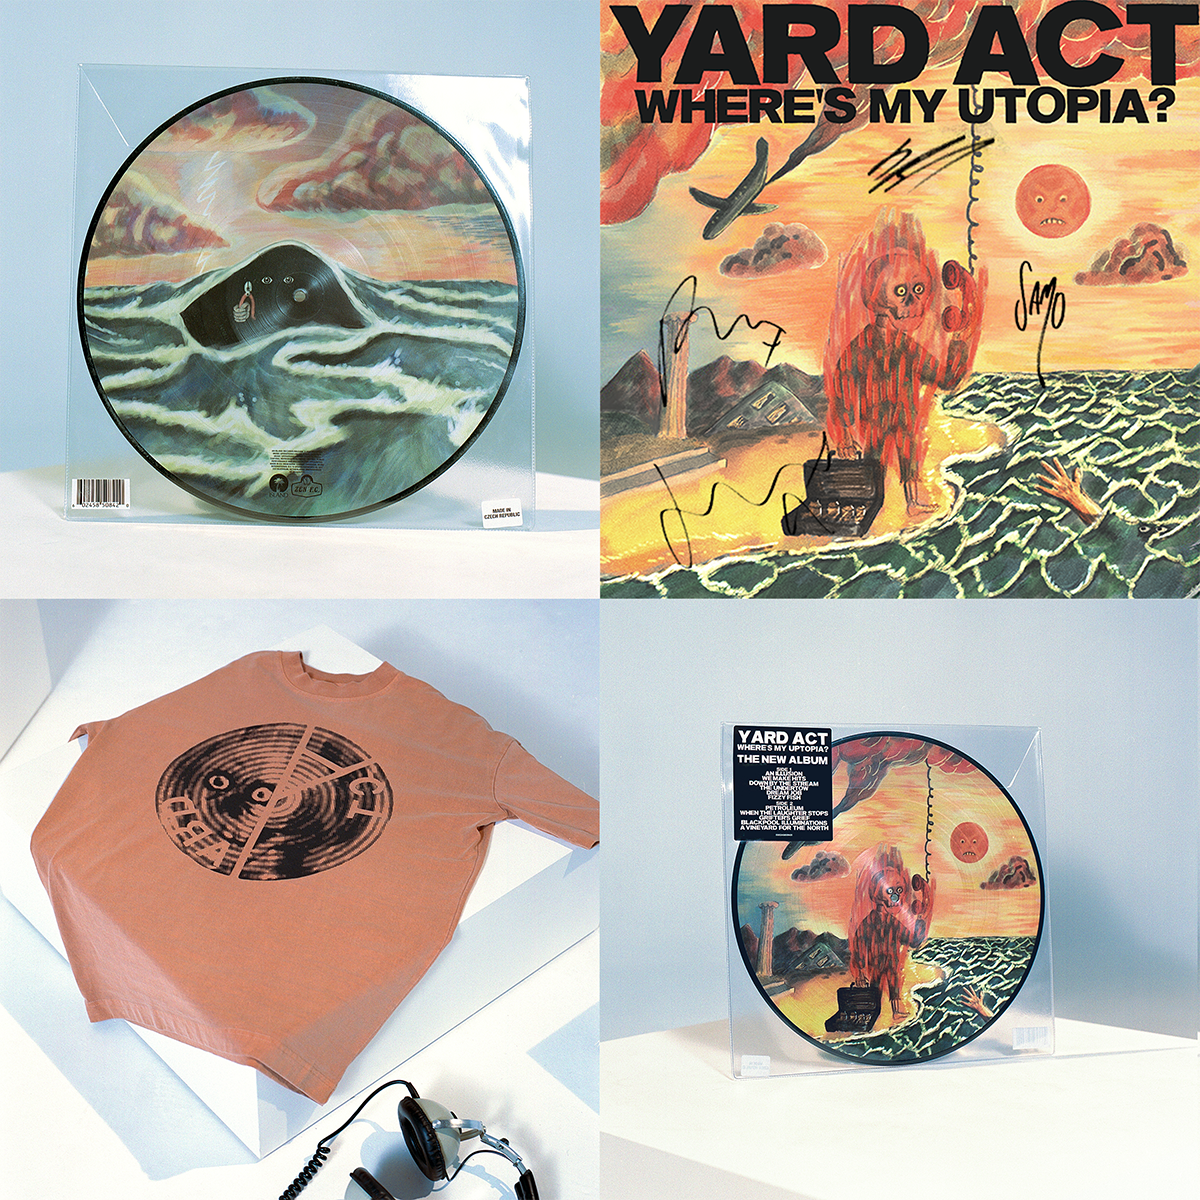 Where’s My Utopia?: Picture Disc, Orange T-shirt + Signed Art Card